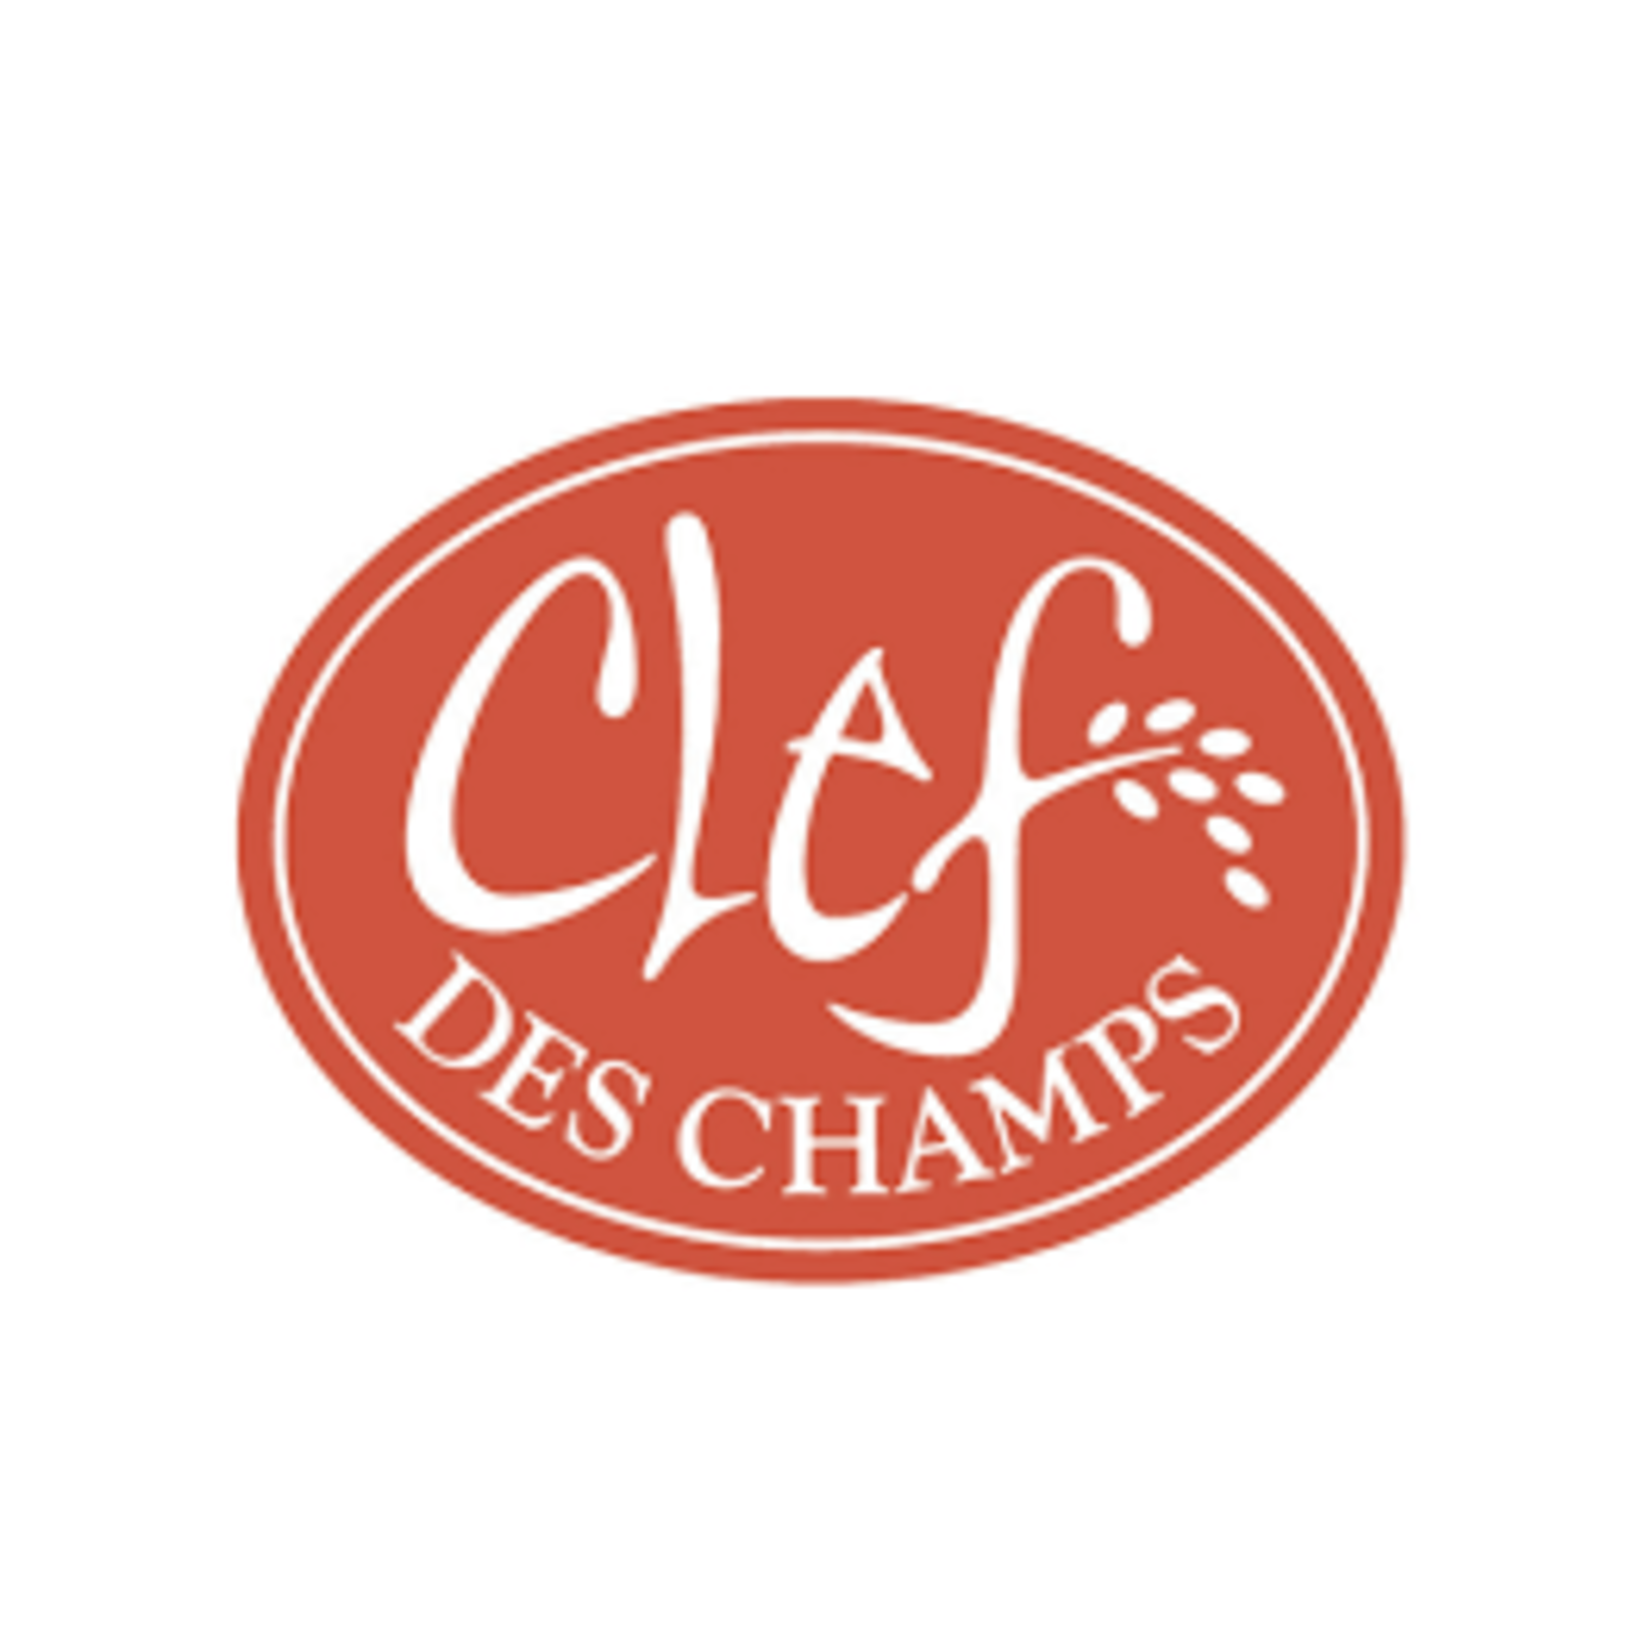 CLEF DES CHAMPS CLEF OATS (GREEN) 60G